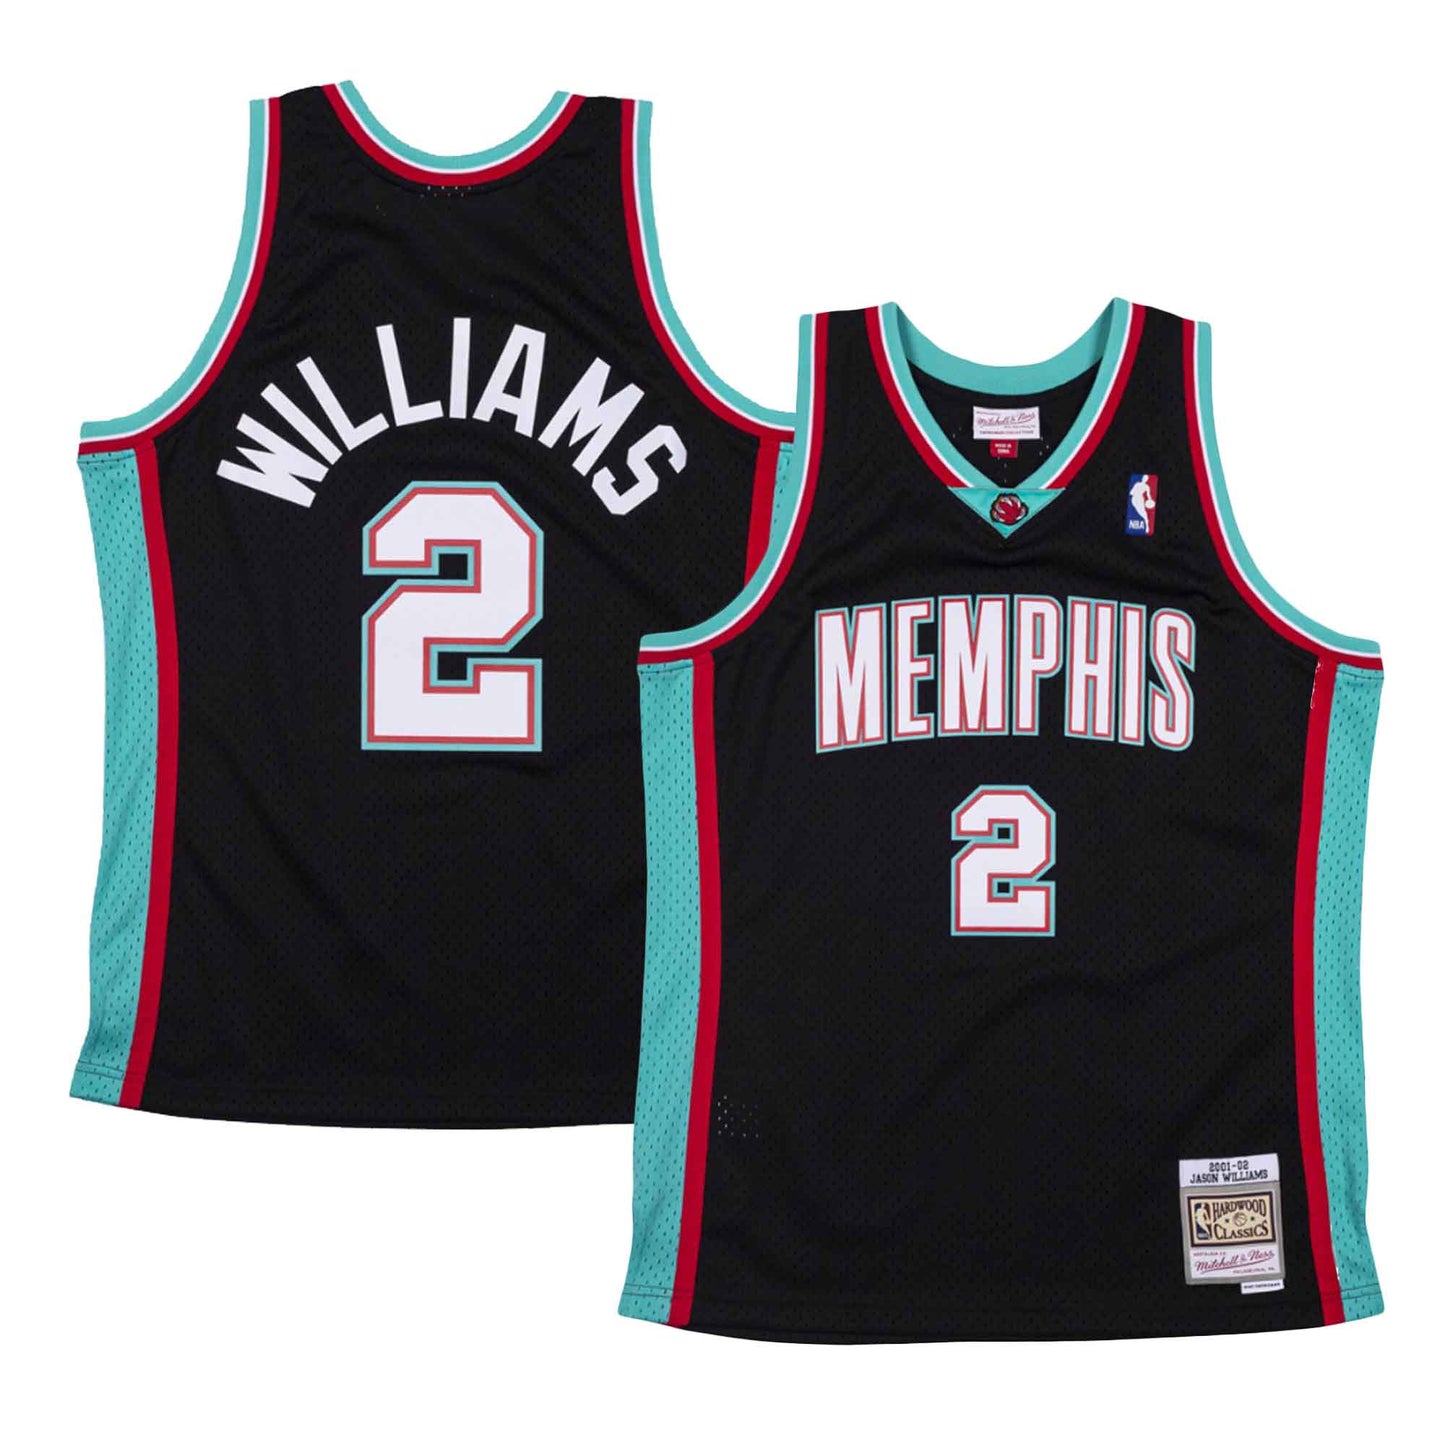 Mitchell & Ness Vancouver Grizzlies #50 Bryant Reeves white